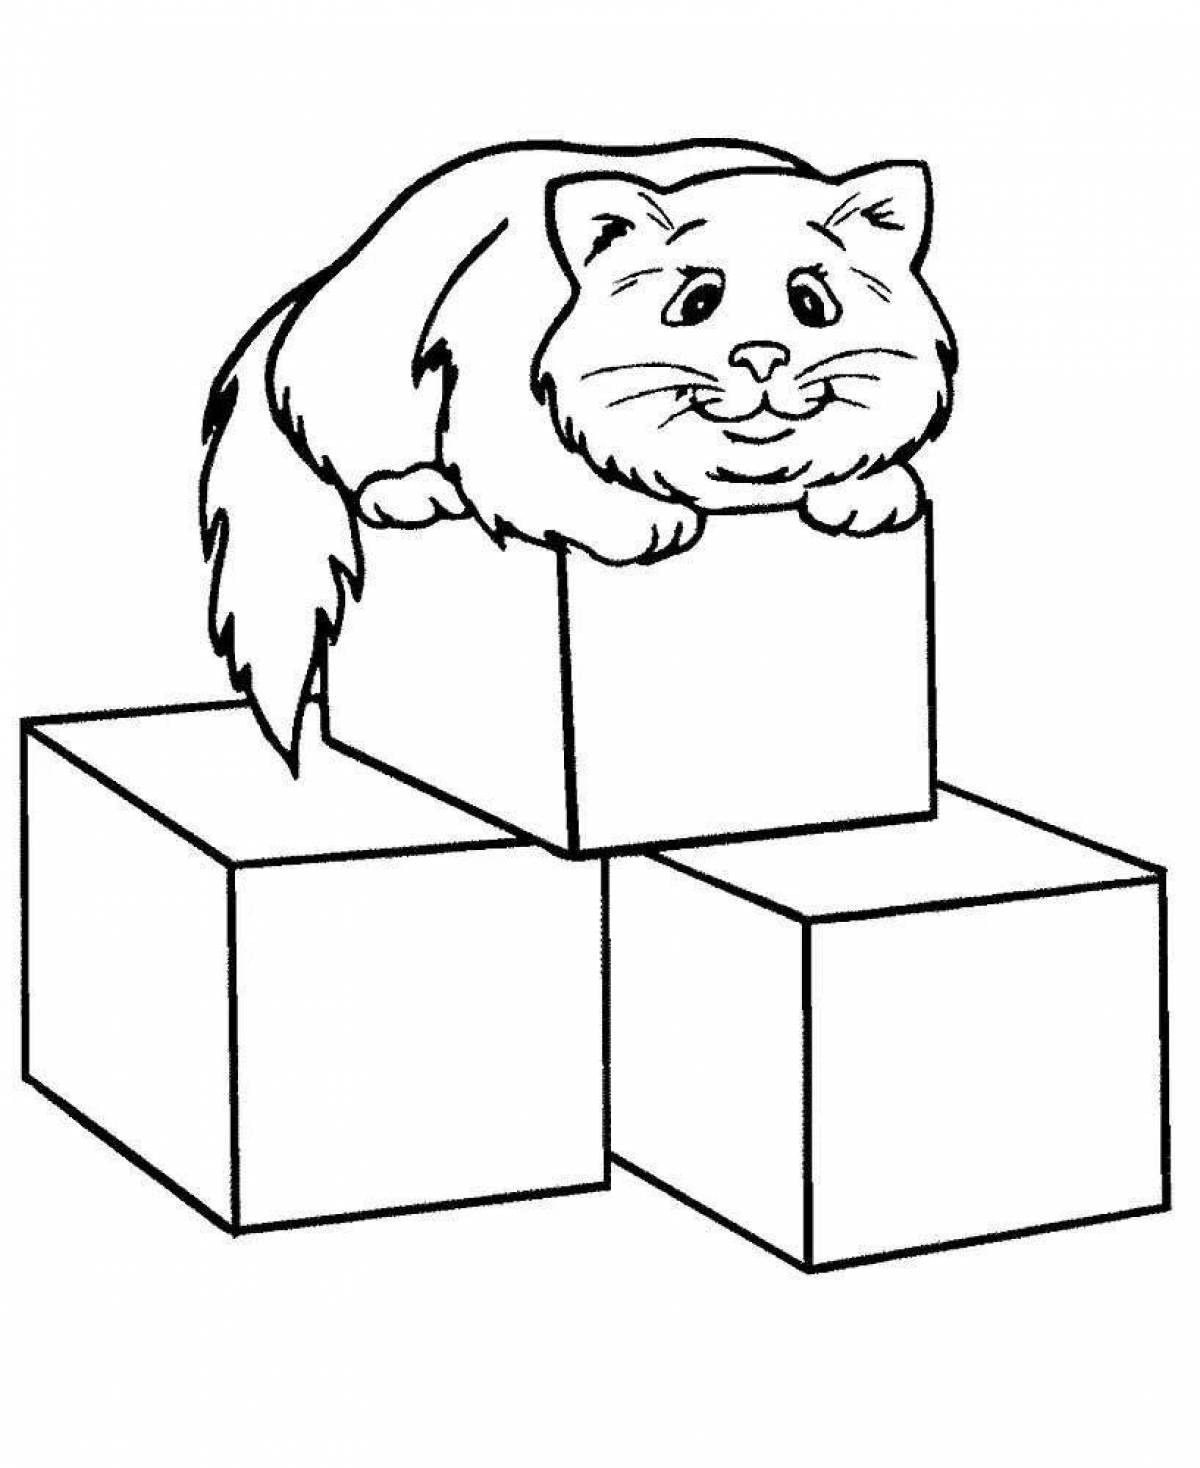 Coloring page playful cat in a box